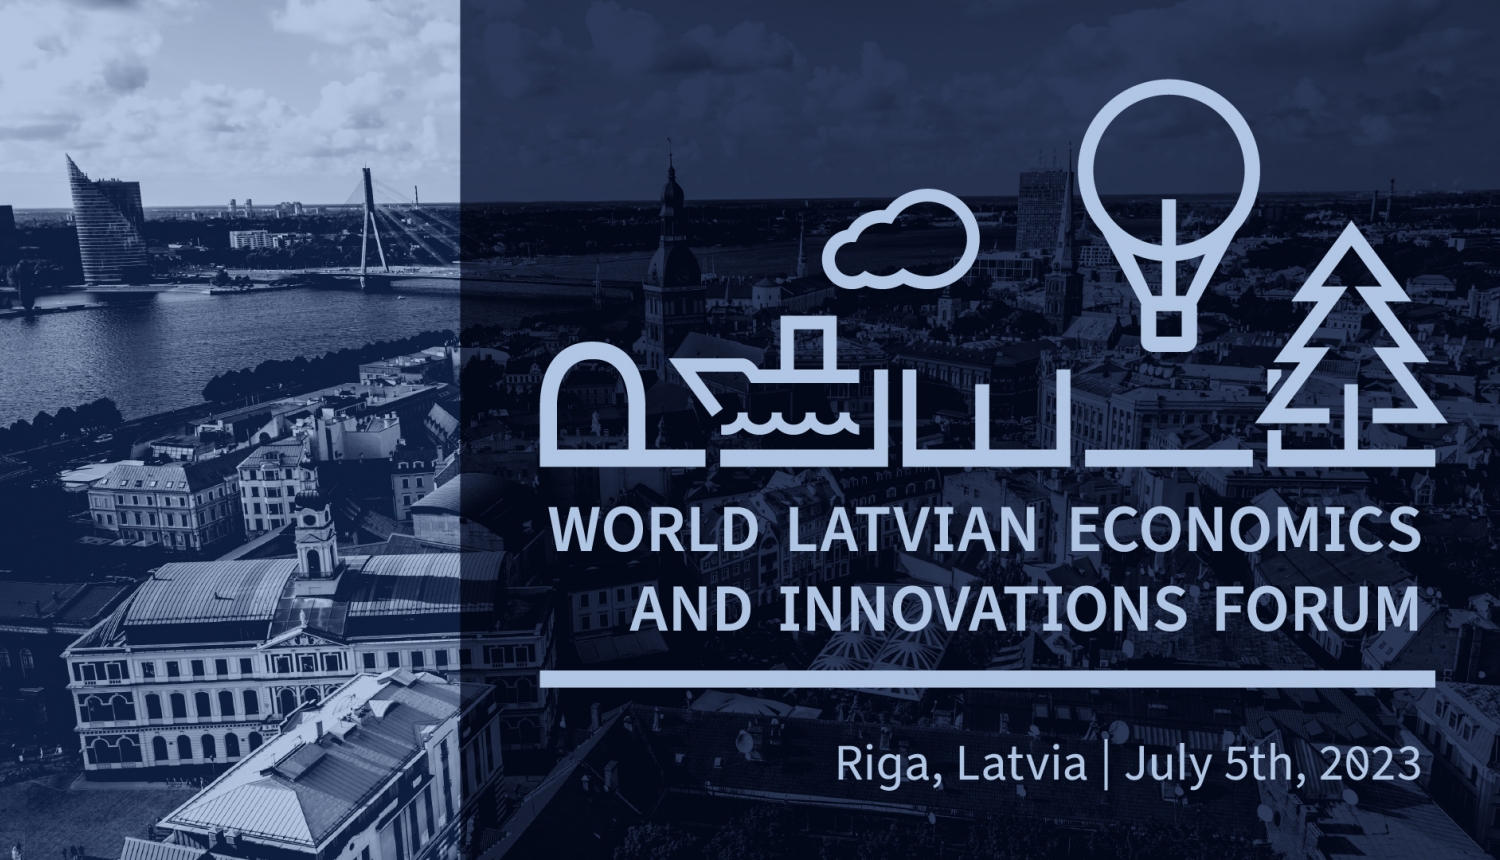 The WFFL gears up for the World Latvian Economics and Innovations Forum 2023